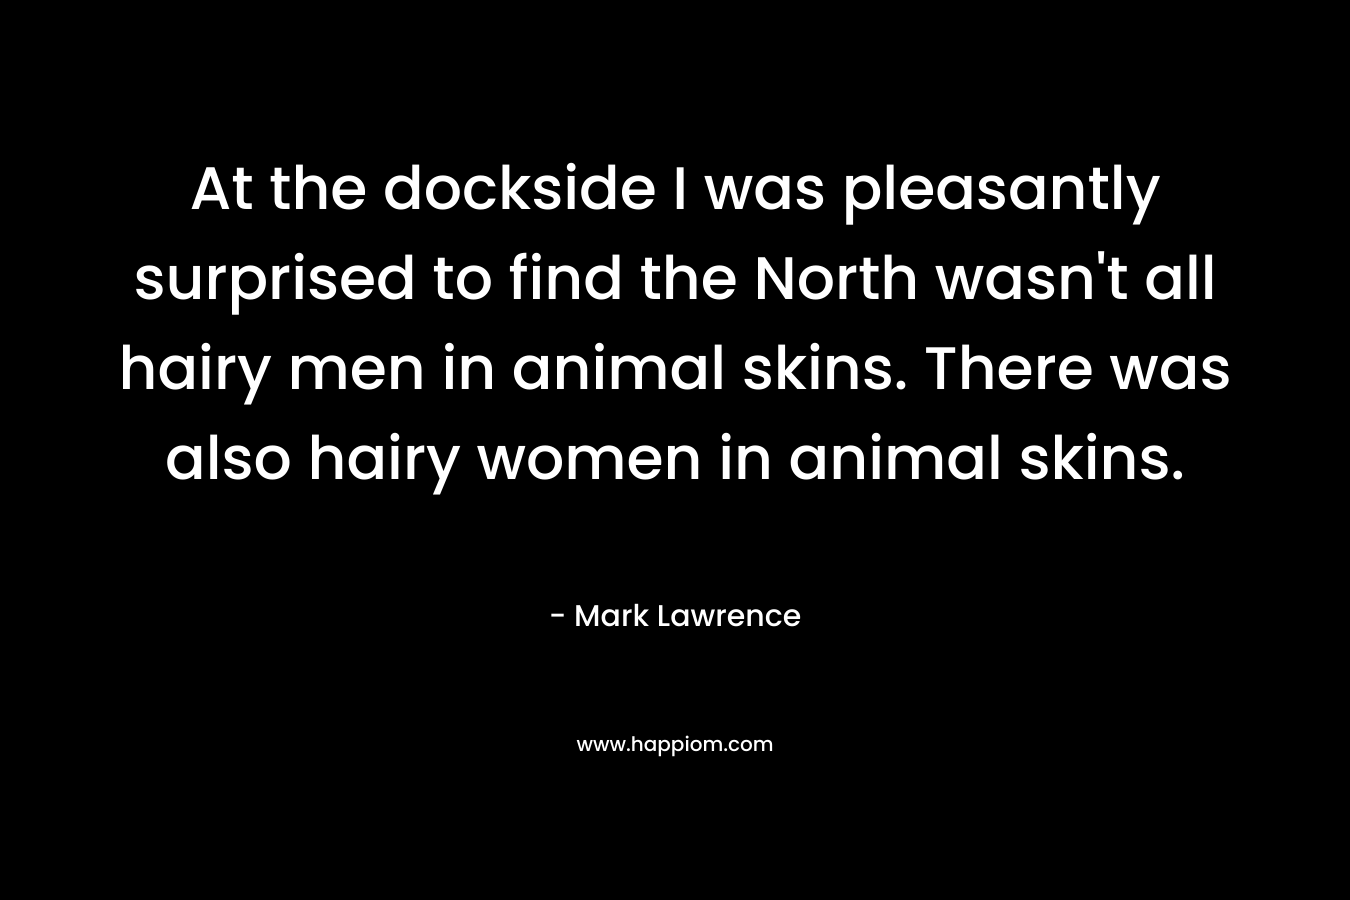 At the dockside I was pleasantly surprised to find the North wasn’t all hairy men in animal skins. There was also hairy women in animal skins. – Mark Lawrence